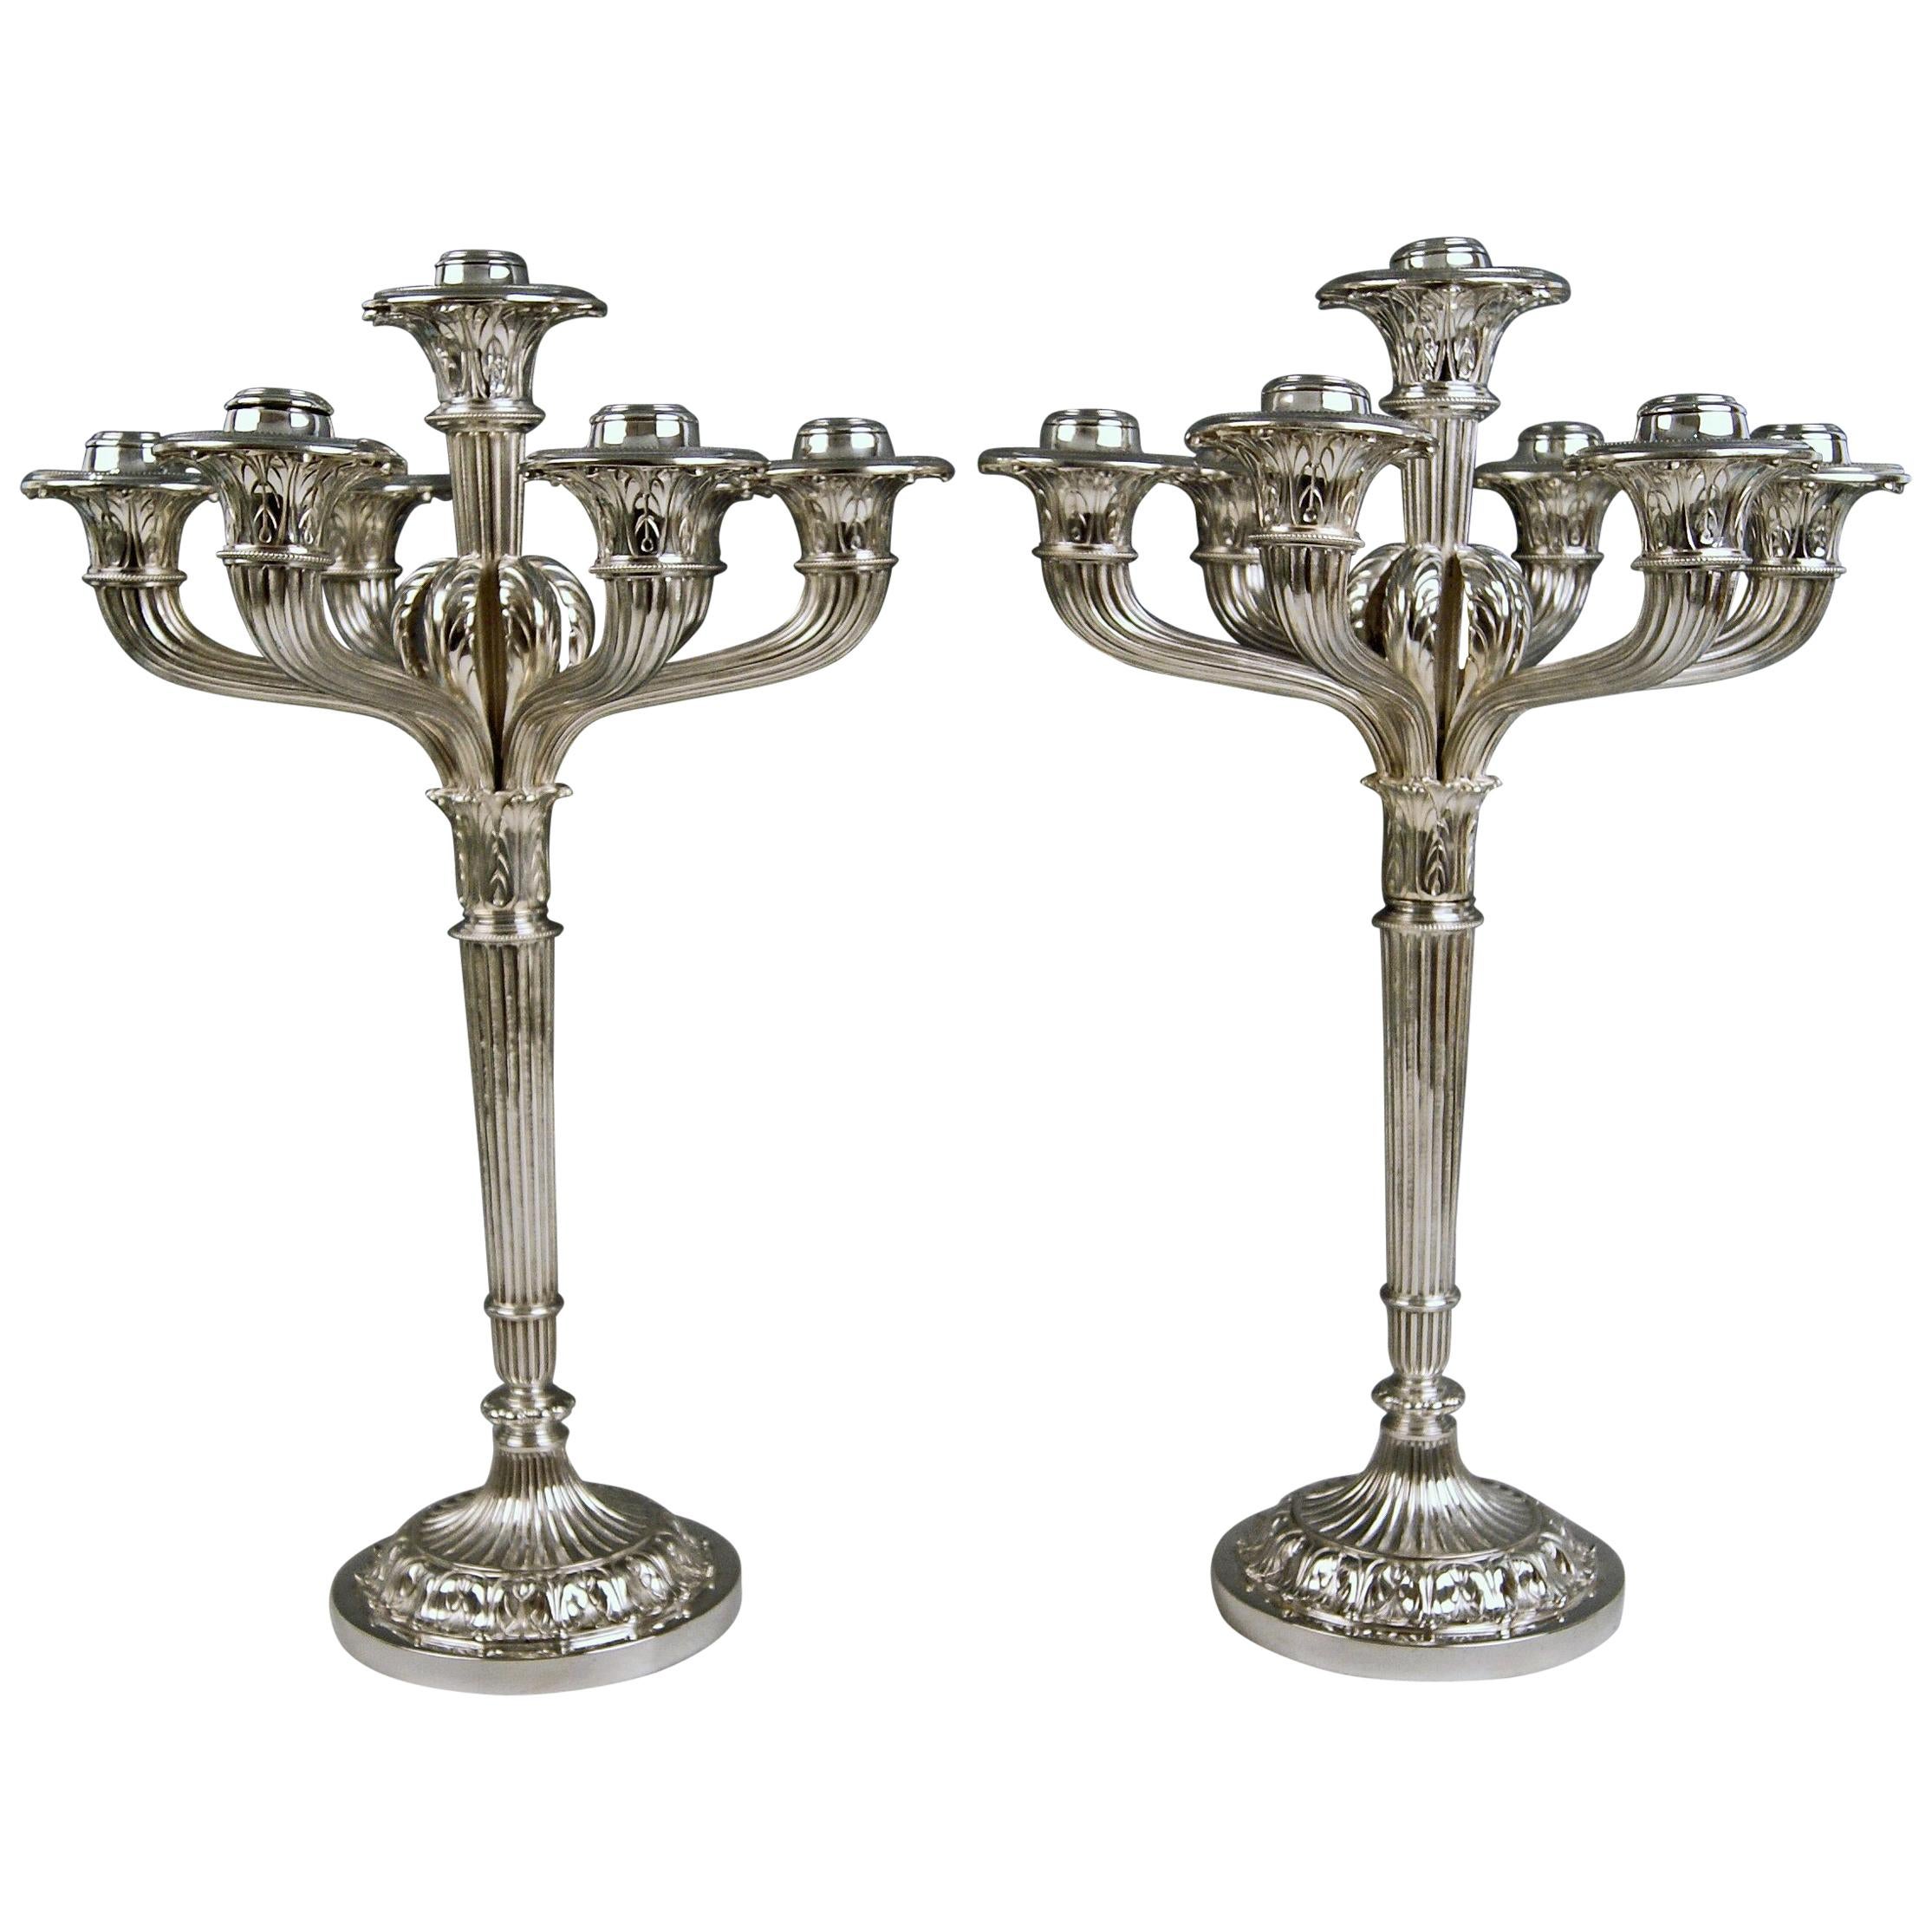 Silver Pair of Candlesticks Bruckmann & Sons Weight 206.27 oz Germany, 1882-1885